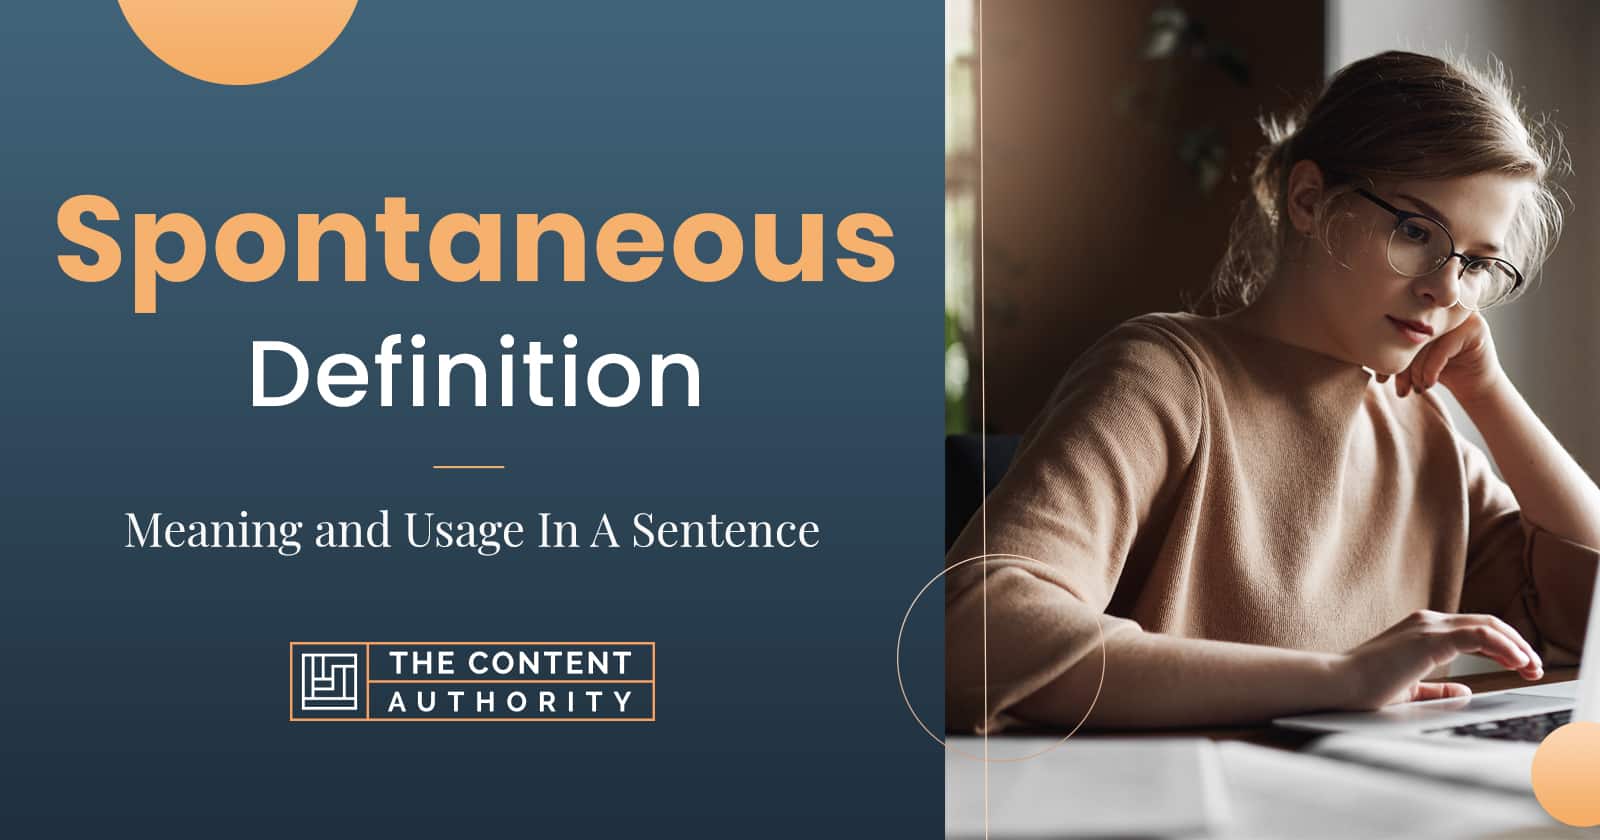 Spontaneous Definition – Meaning and Usage In A Sentence